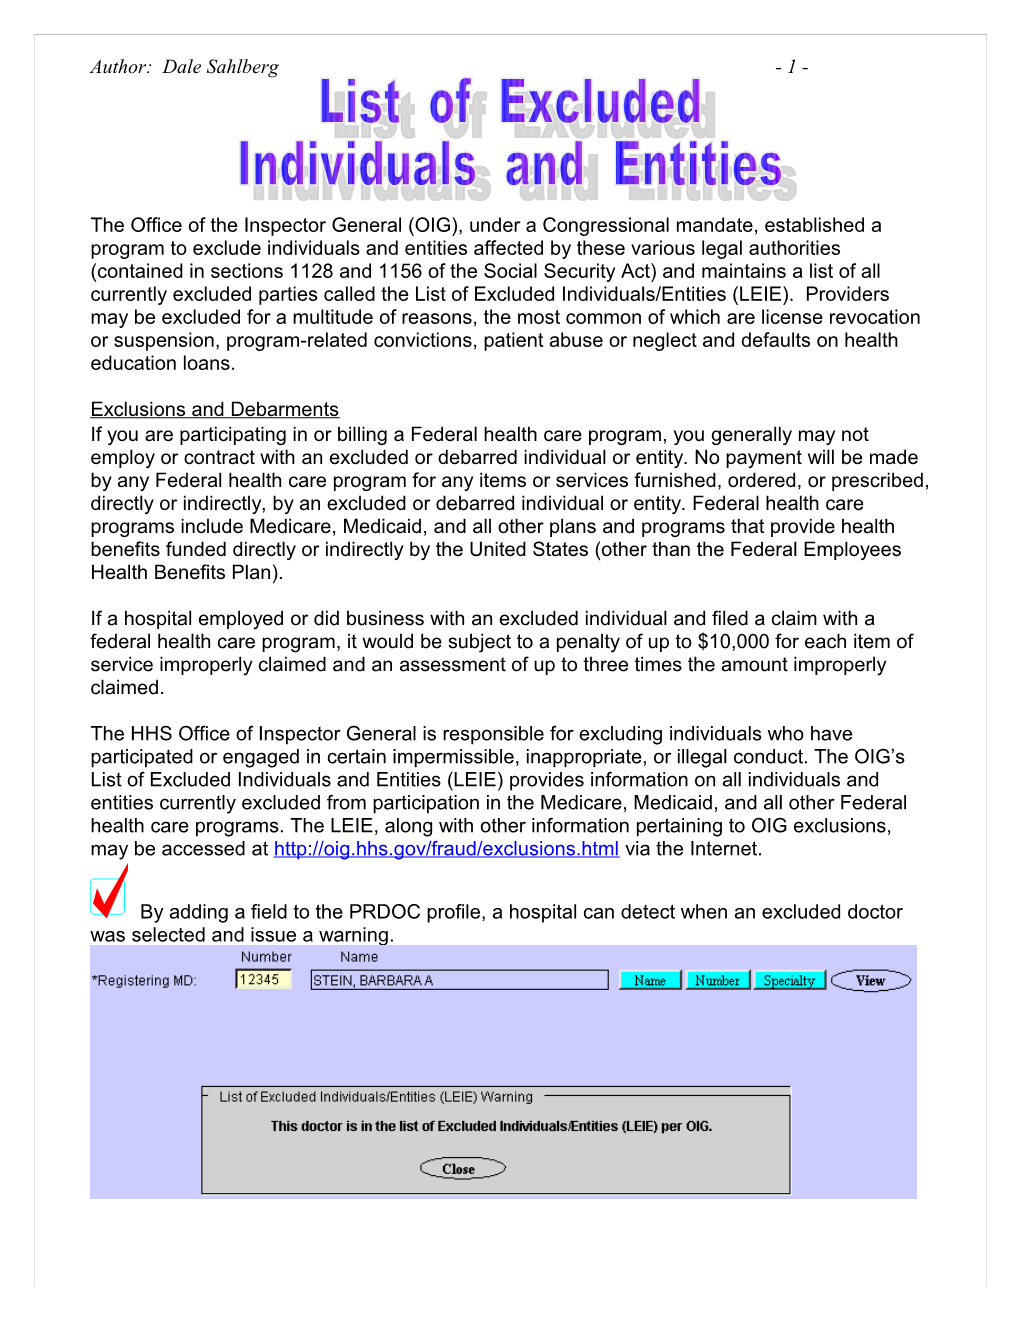 List of Excluded Individuals and Entities